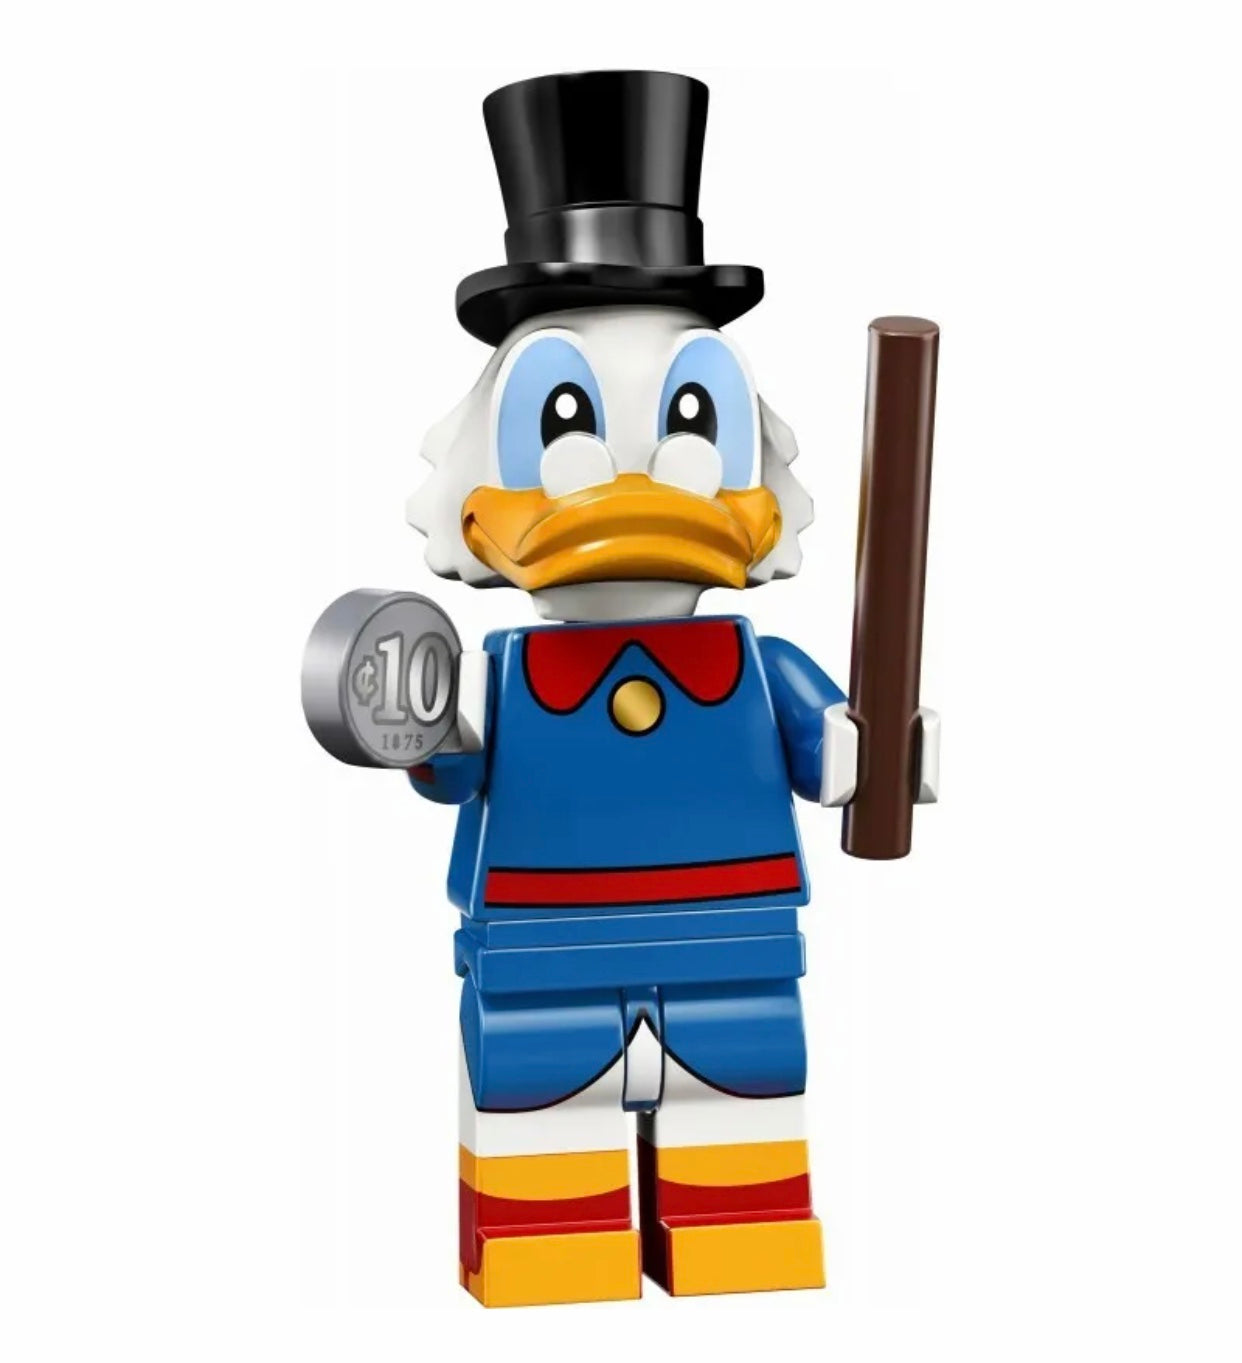 LEGO Disney Series 2 Limited Edition Scrooge McDuck 71024